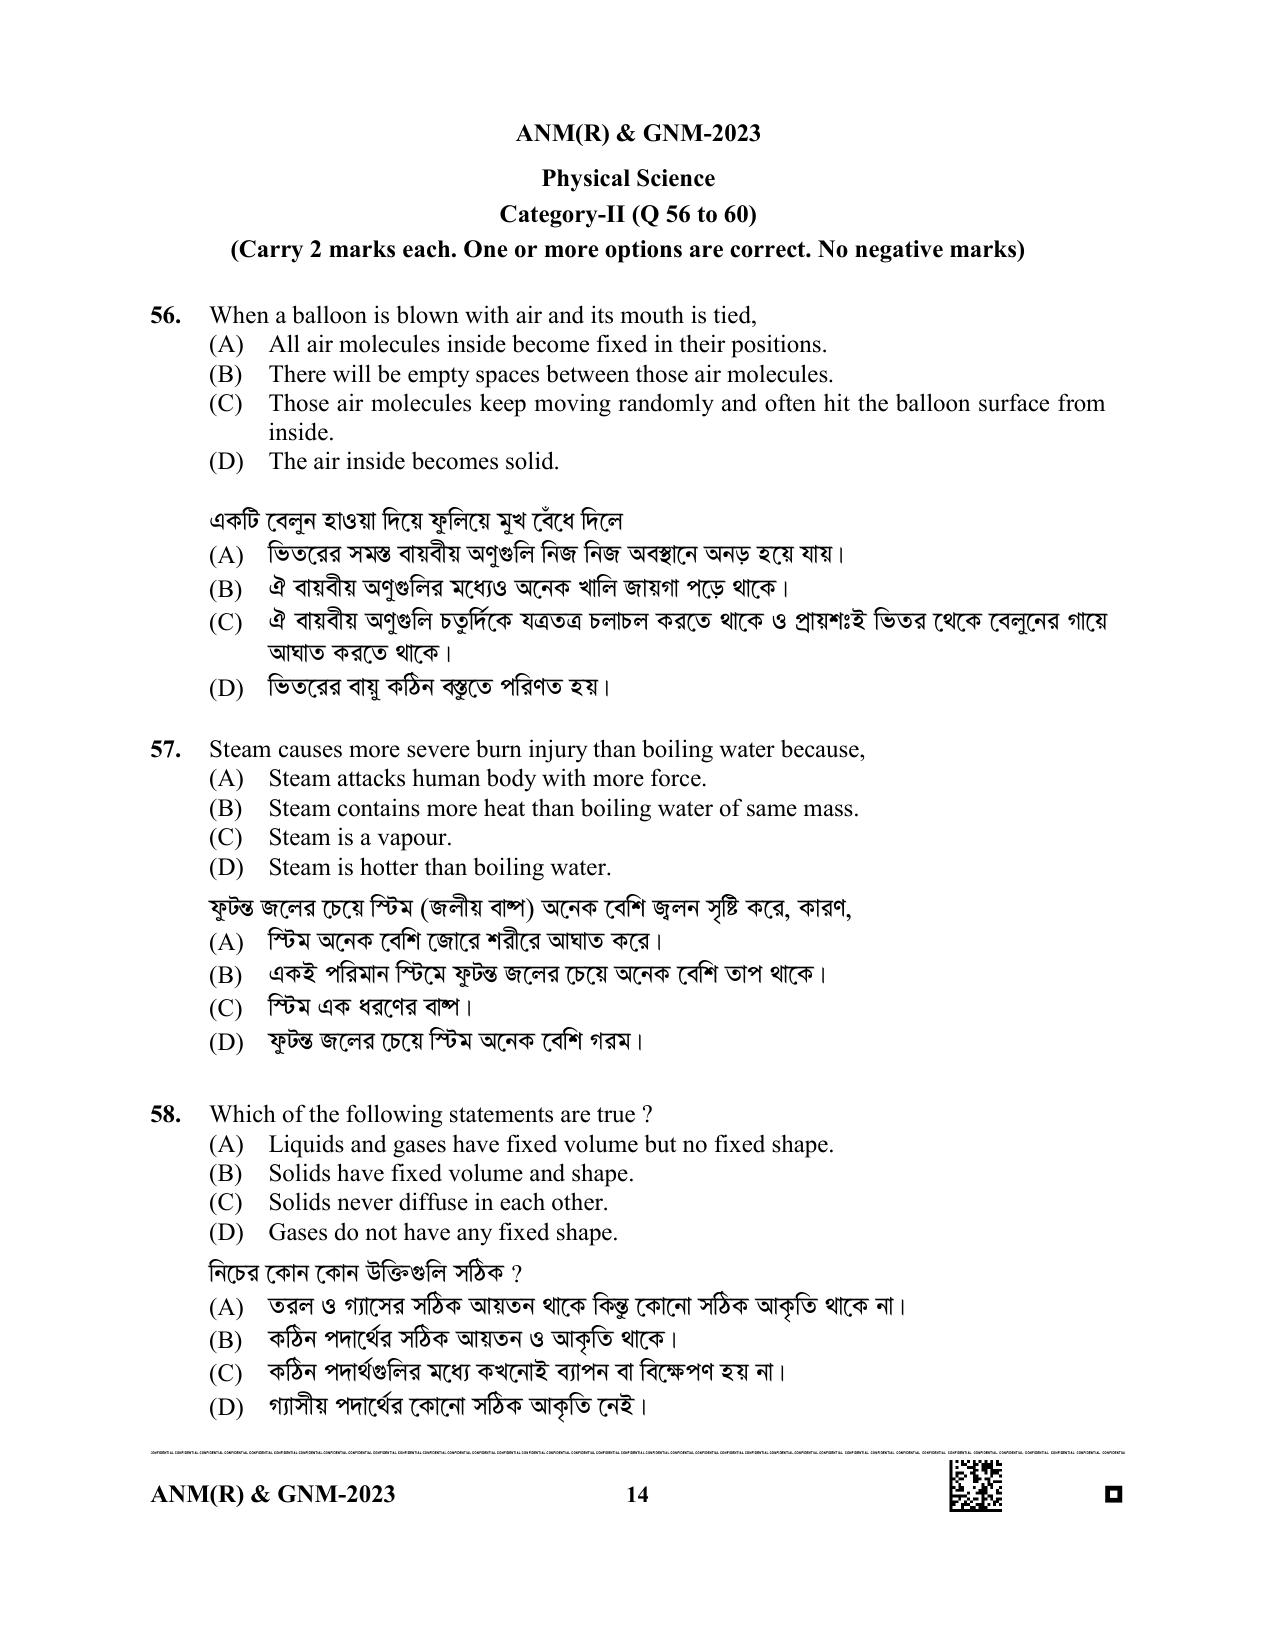 WB ANM GNM 2023 Question Paper - Page 14